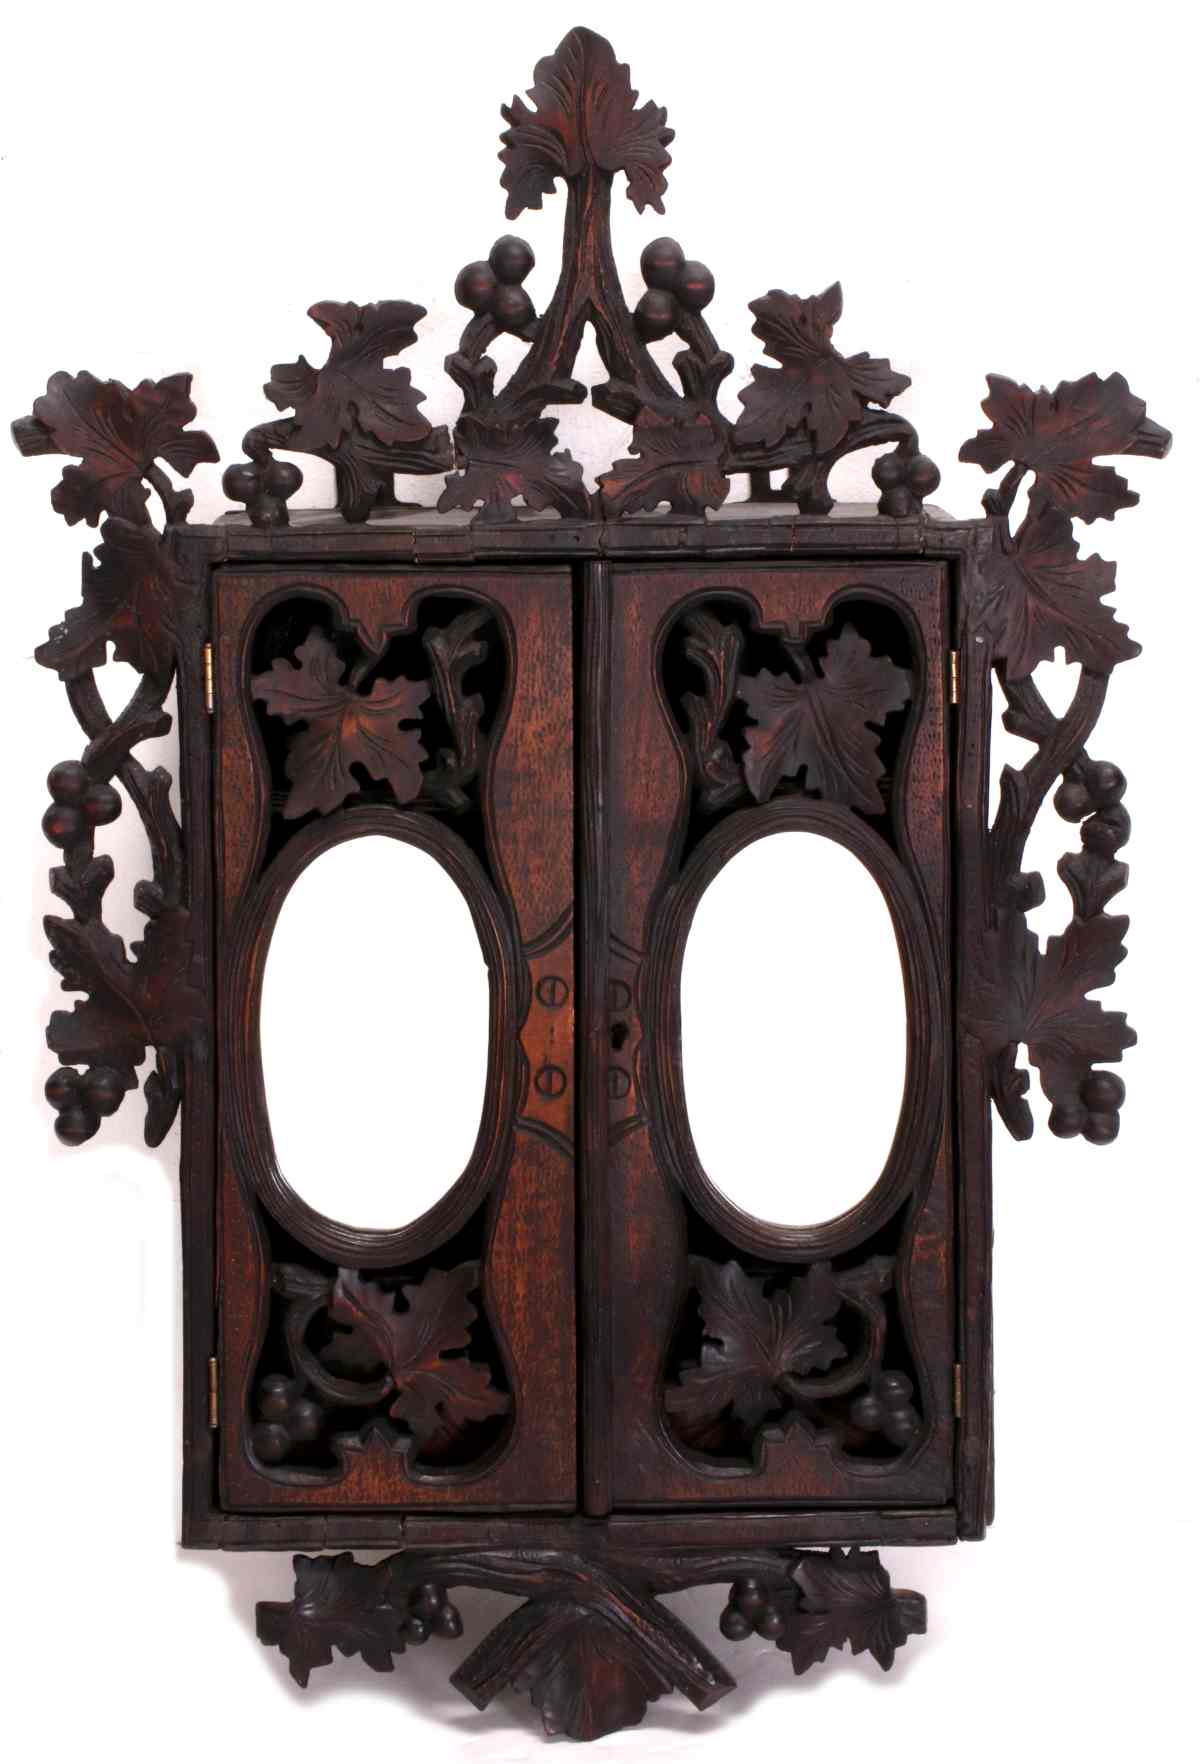 A CIRCA 1880 BLACK FOREST CARVED HANGING CABINET